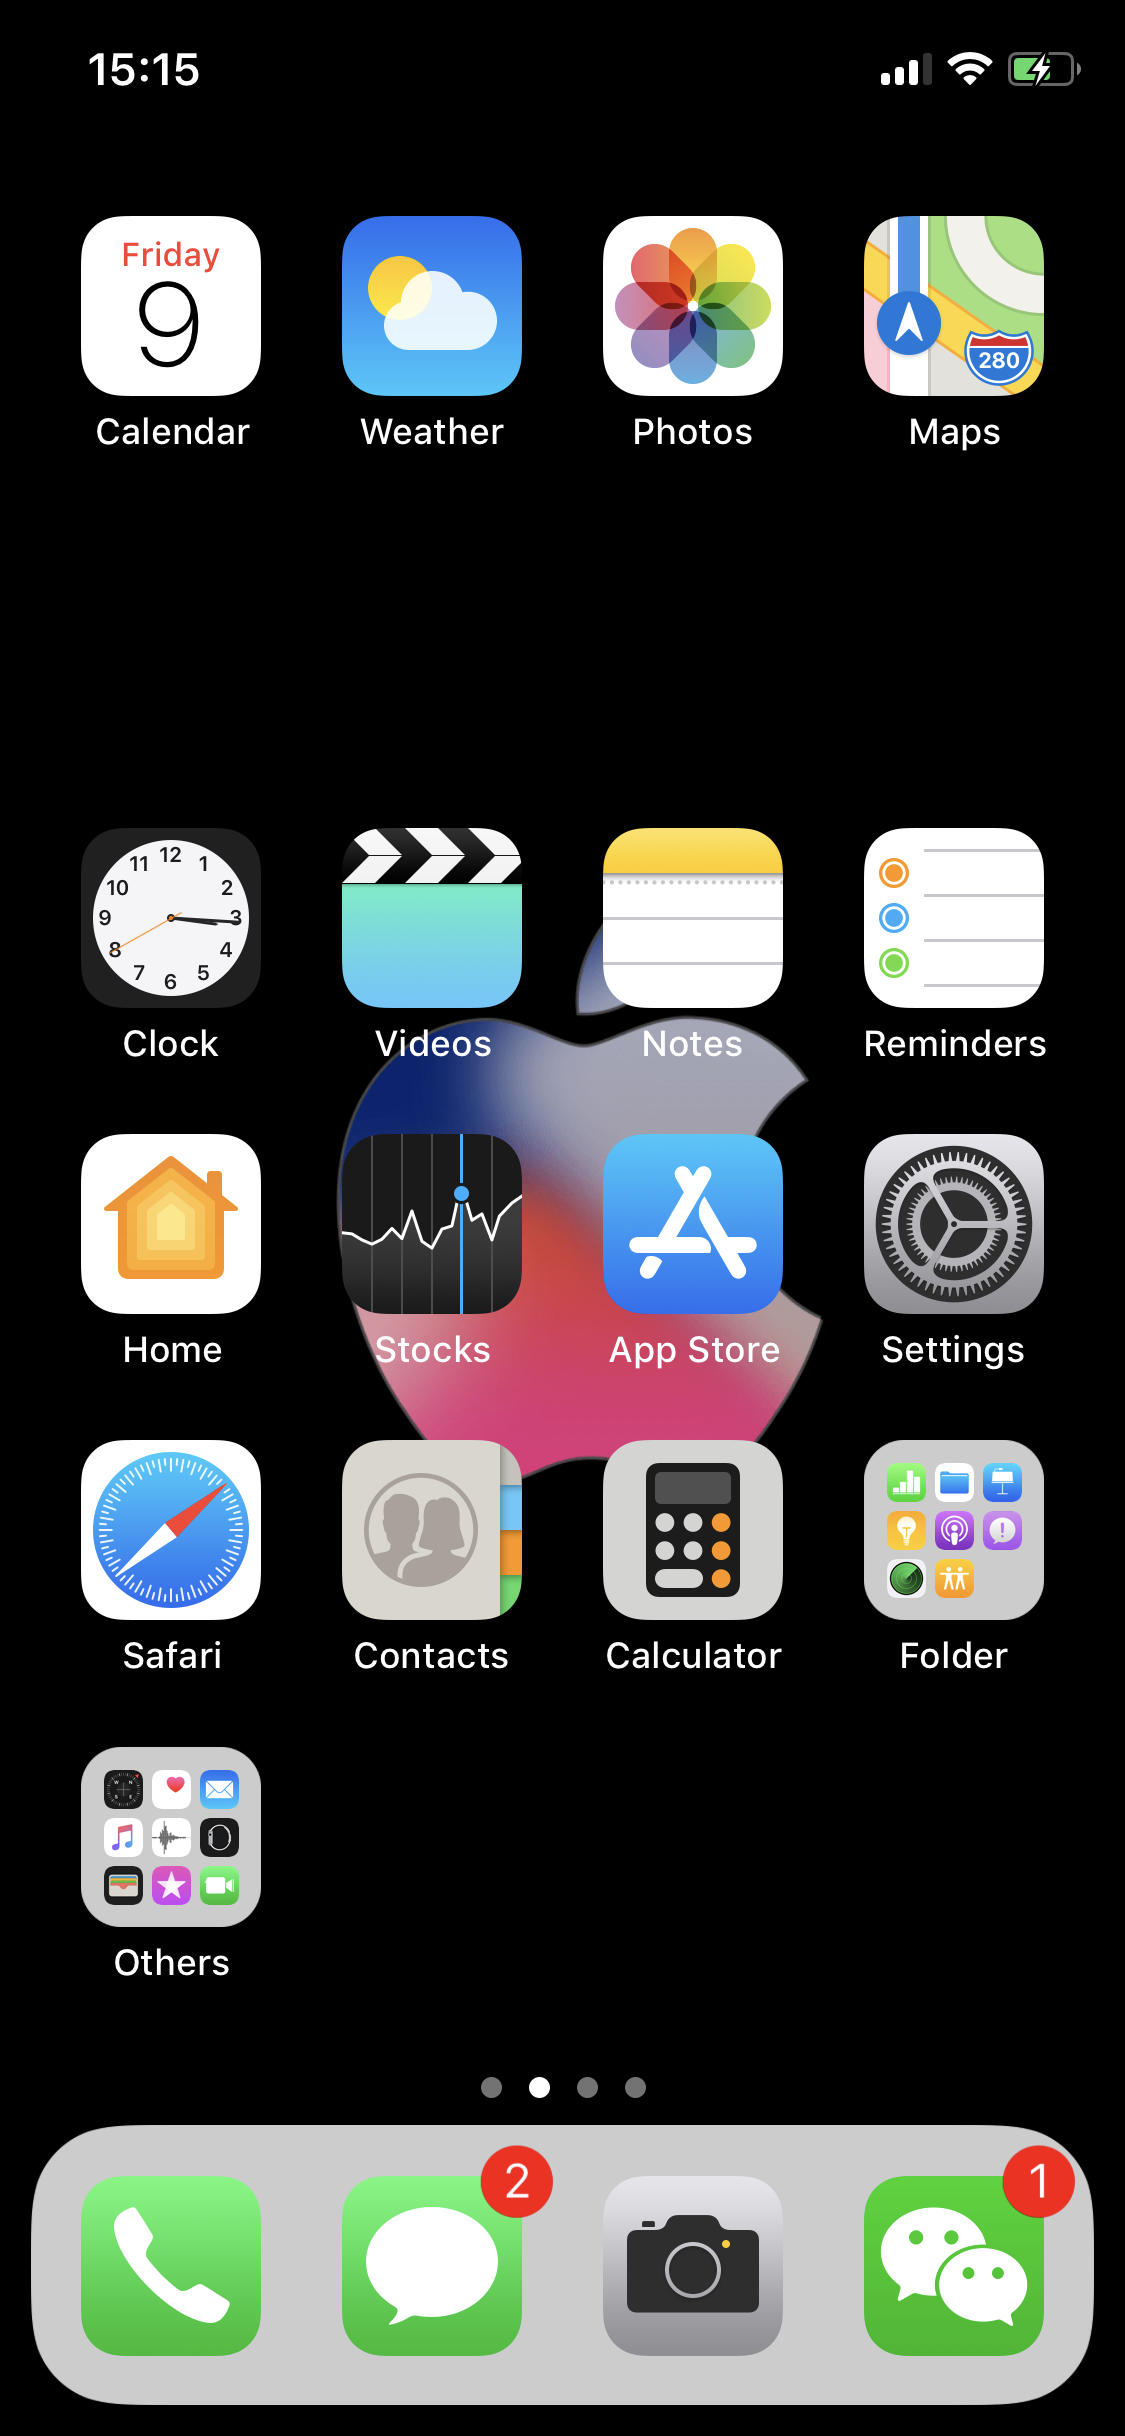 How to Add Blank Spaces to Your iPhone Home Screen Grid?